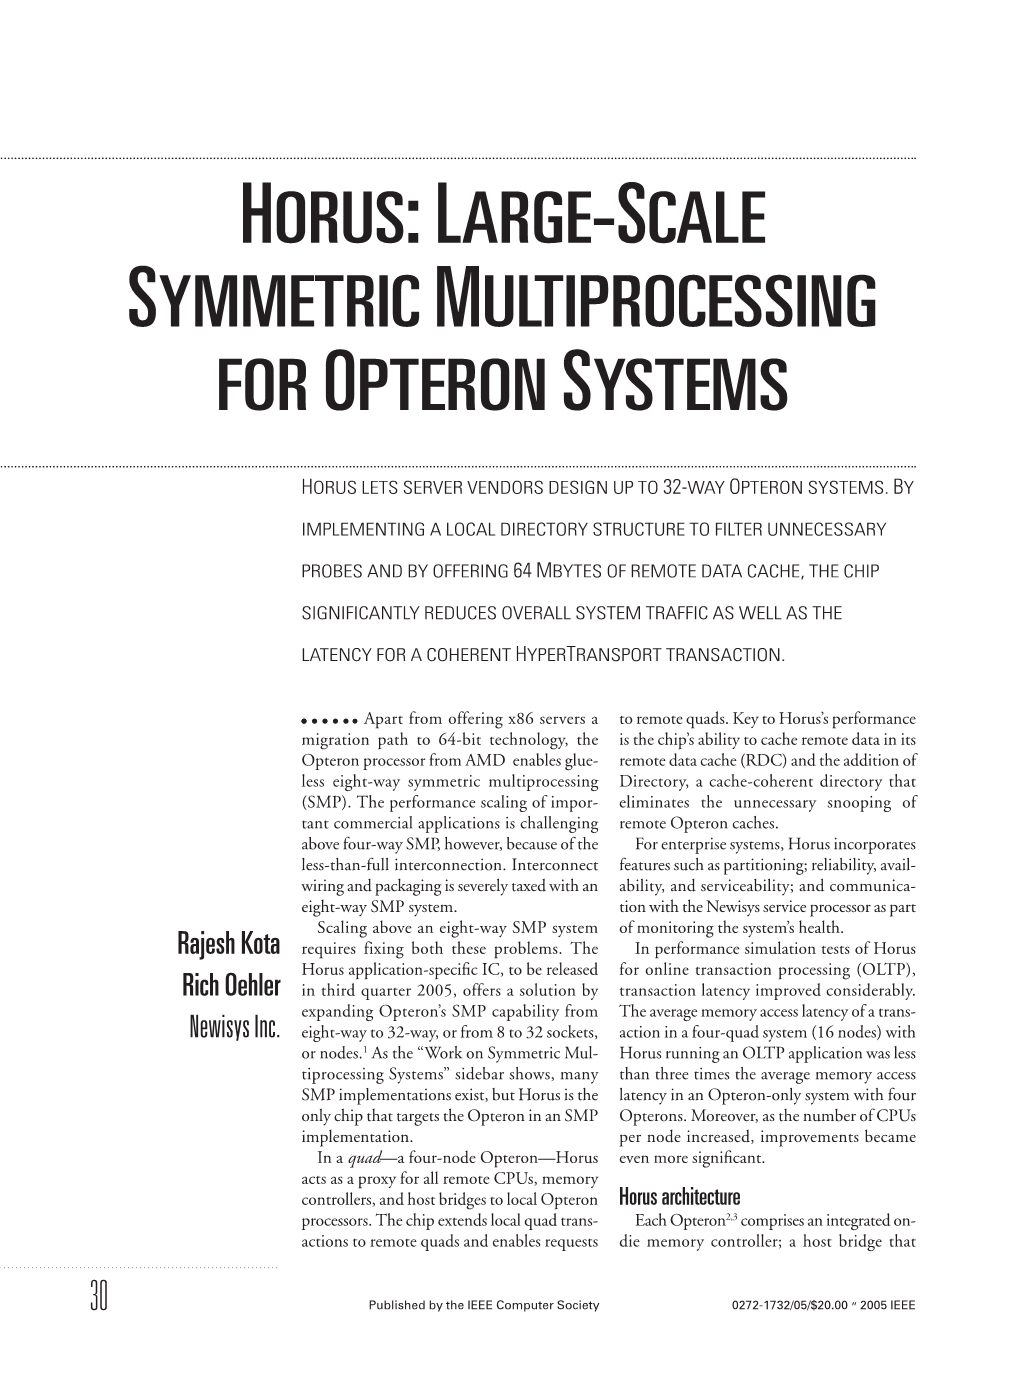 Horus: Large-Scale Symmetric Multiprocessing for Opteron Systems